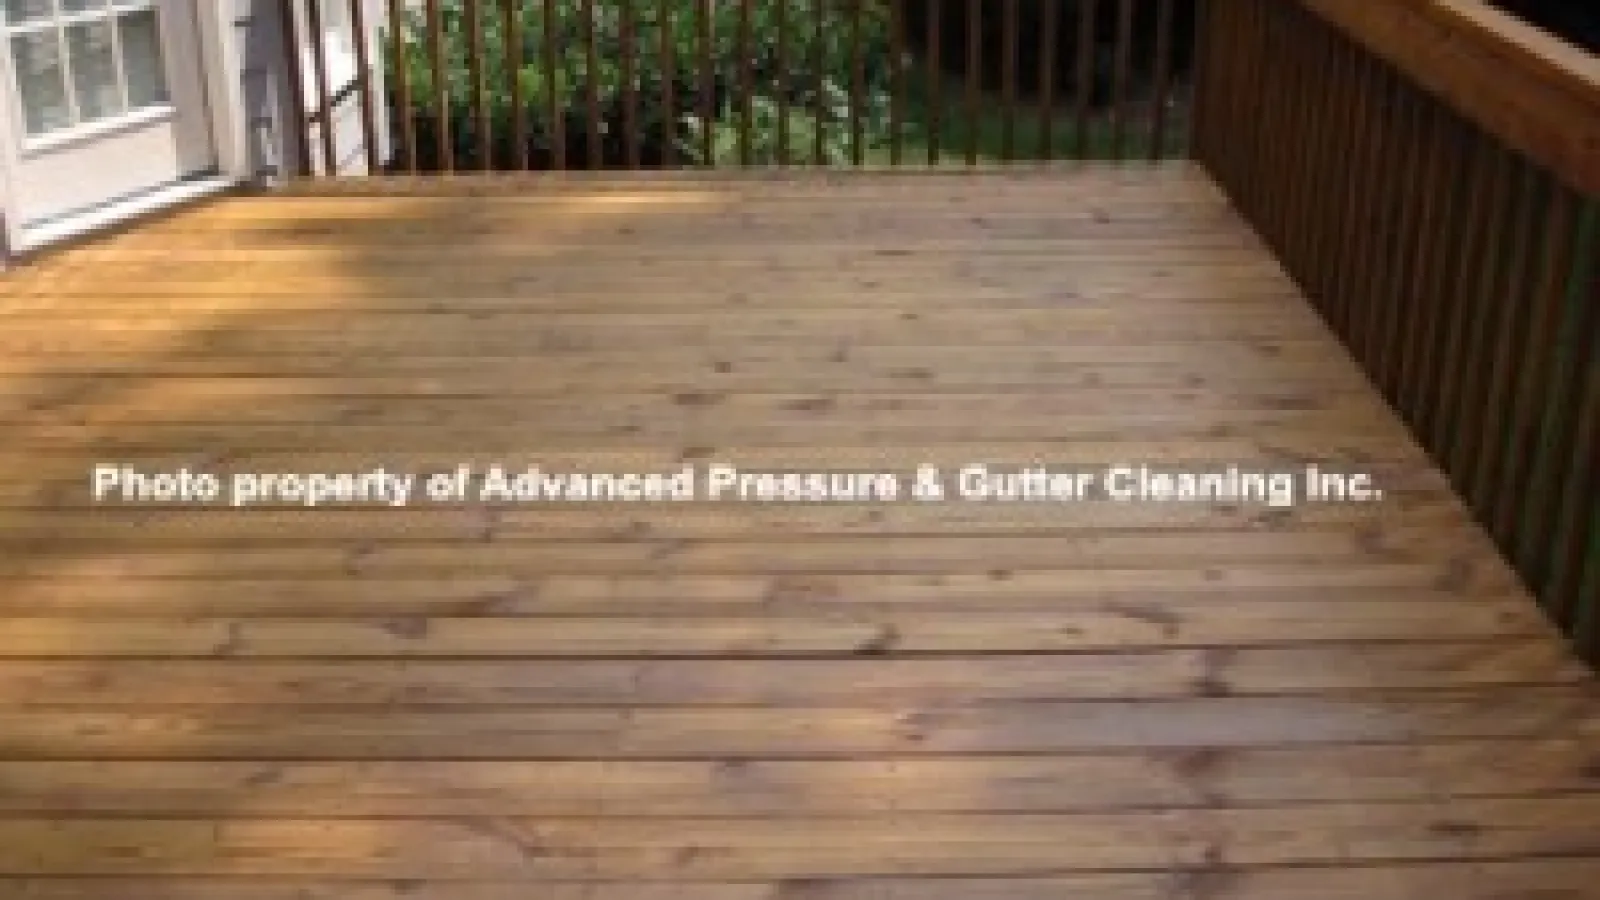 Deck Sealing: What is it and why is it useful?